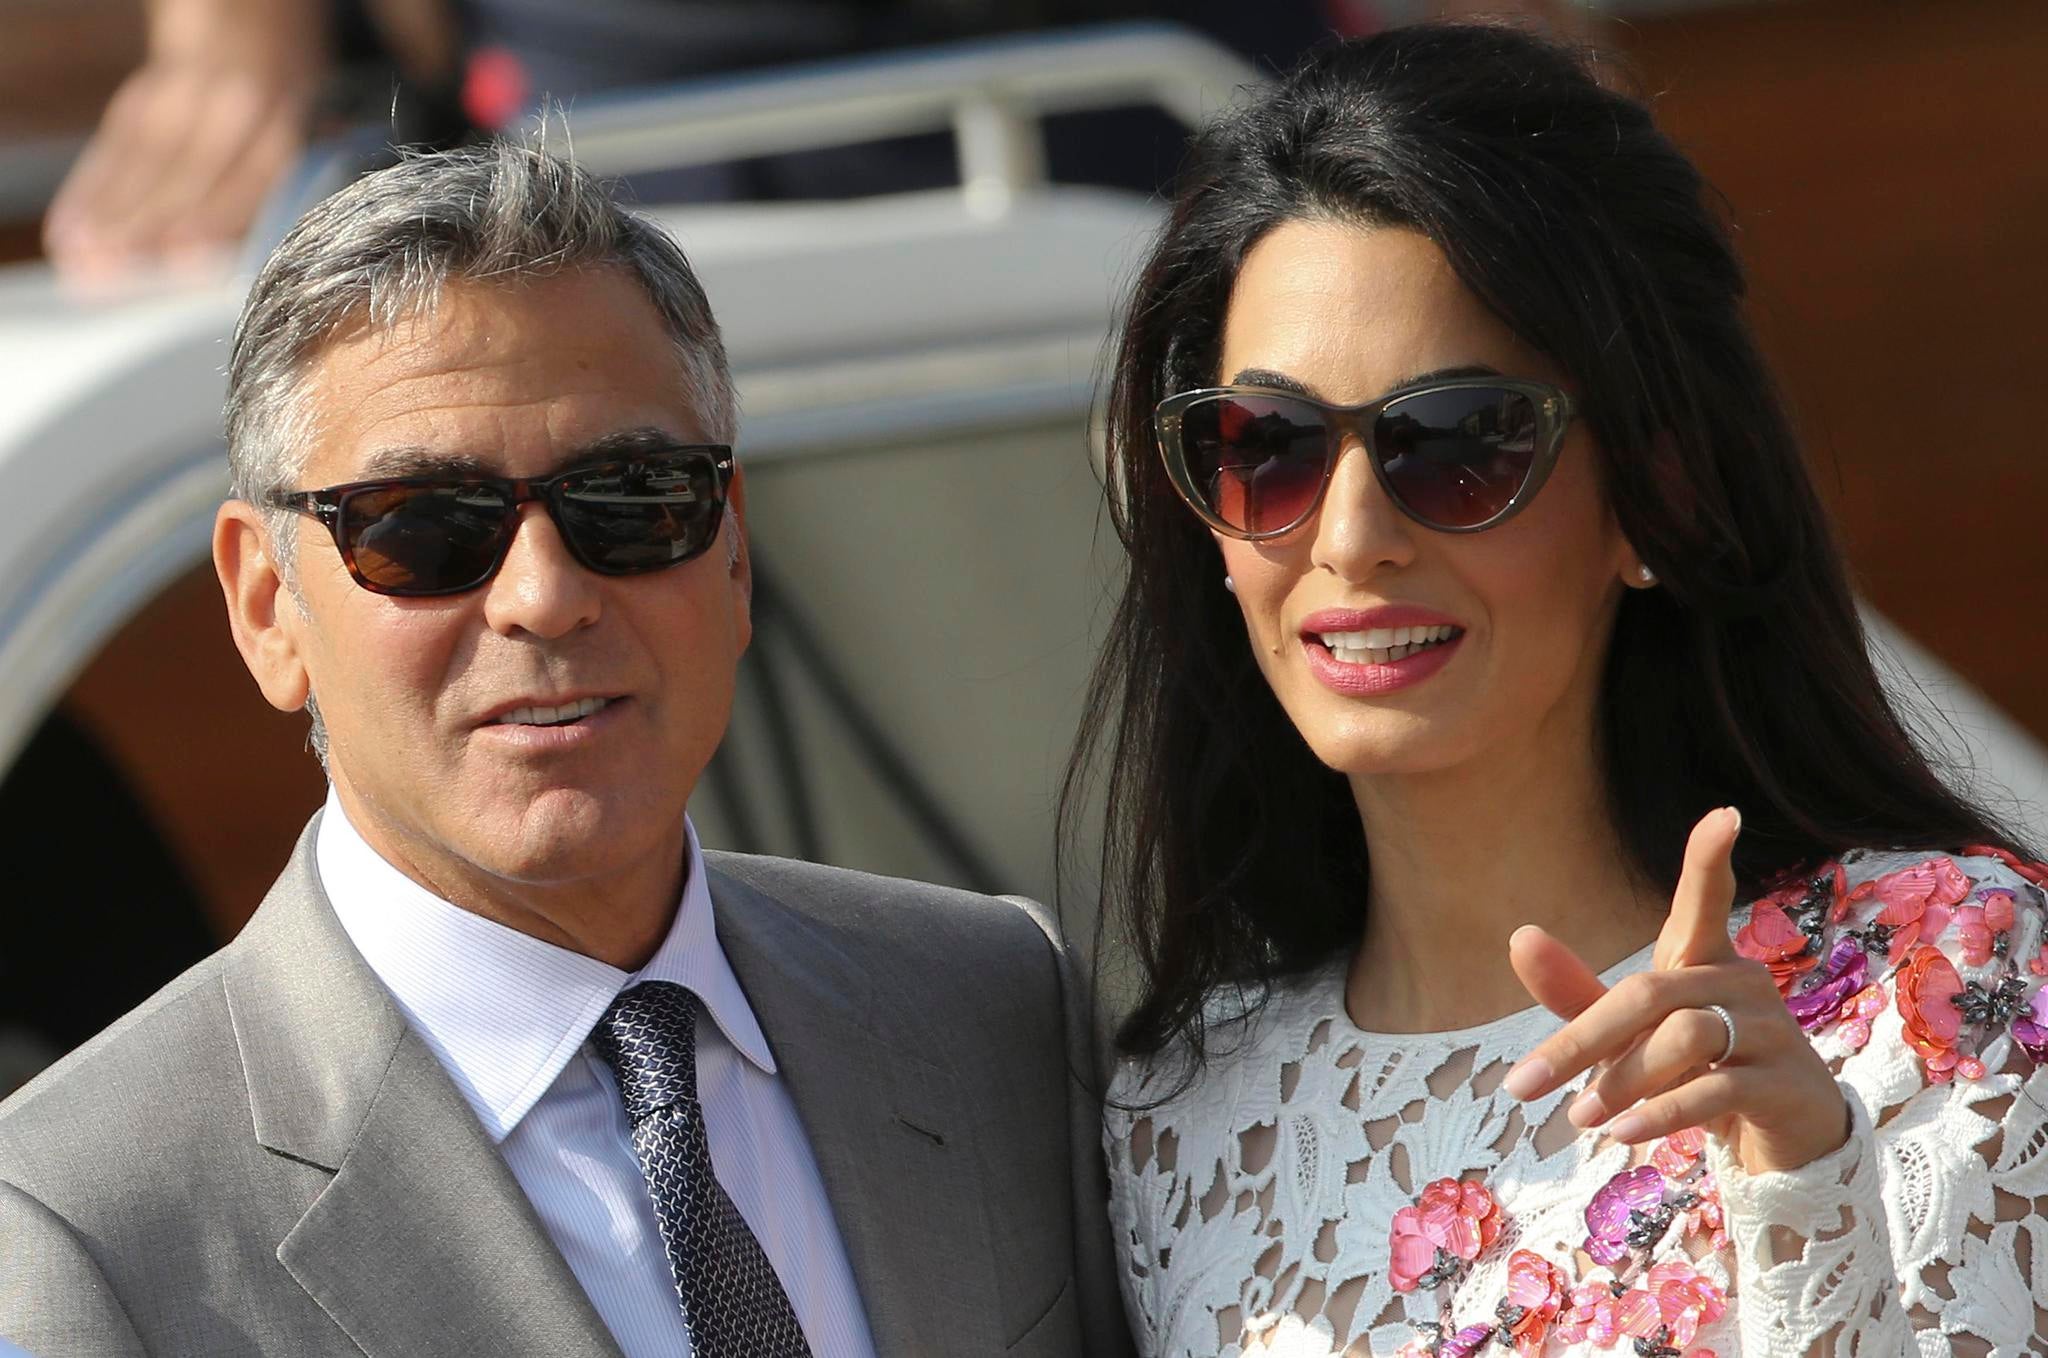 George Clooney and his Lebanon-born British wife Amal Alamuddin take a water taxi after tying the knot at a ceremony yesterday